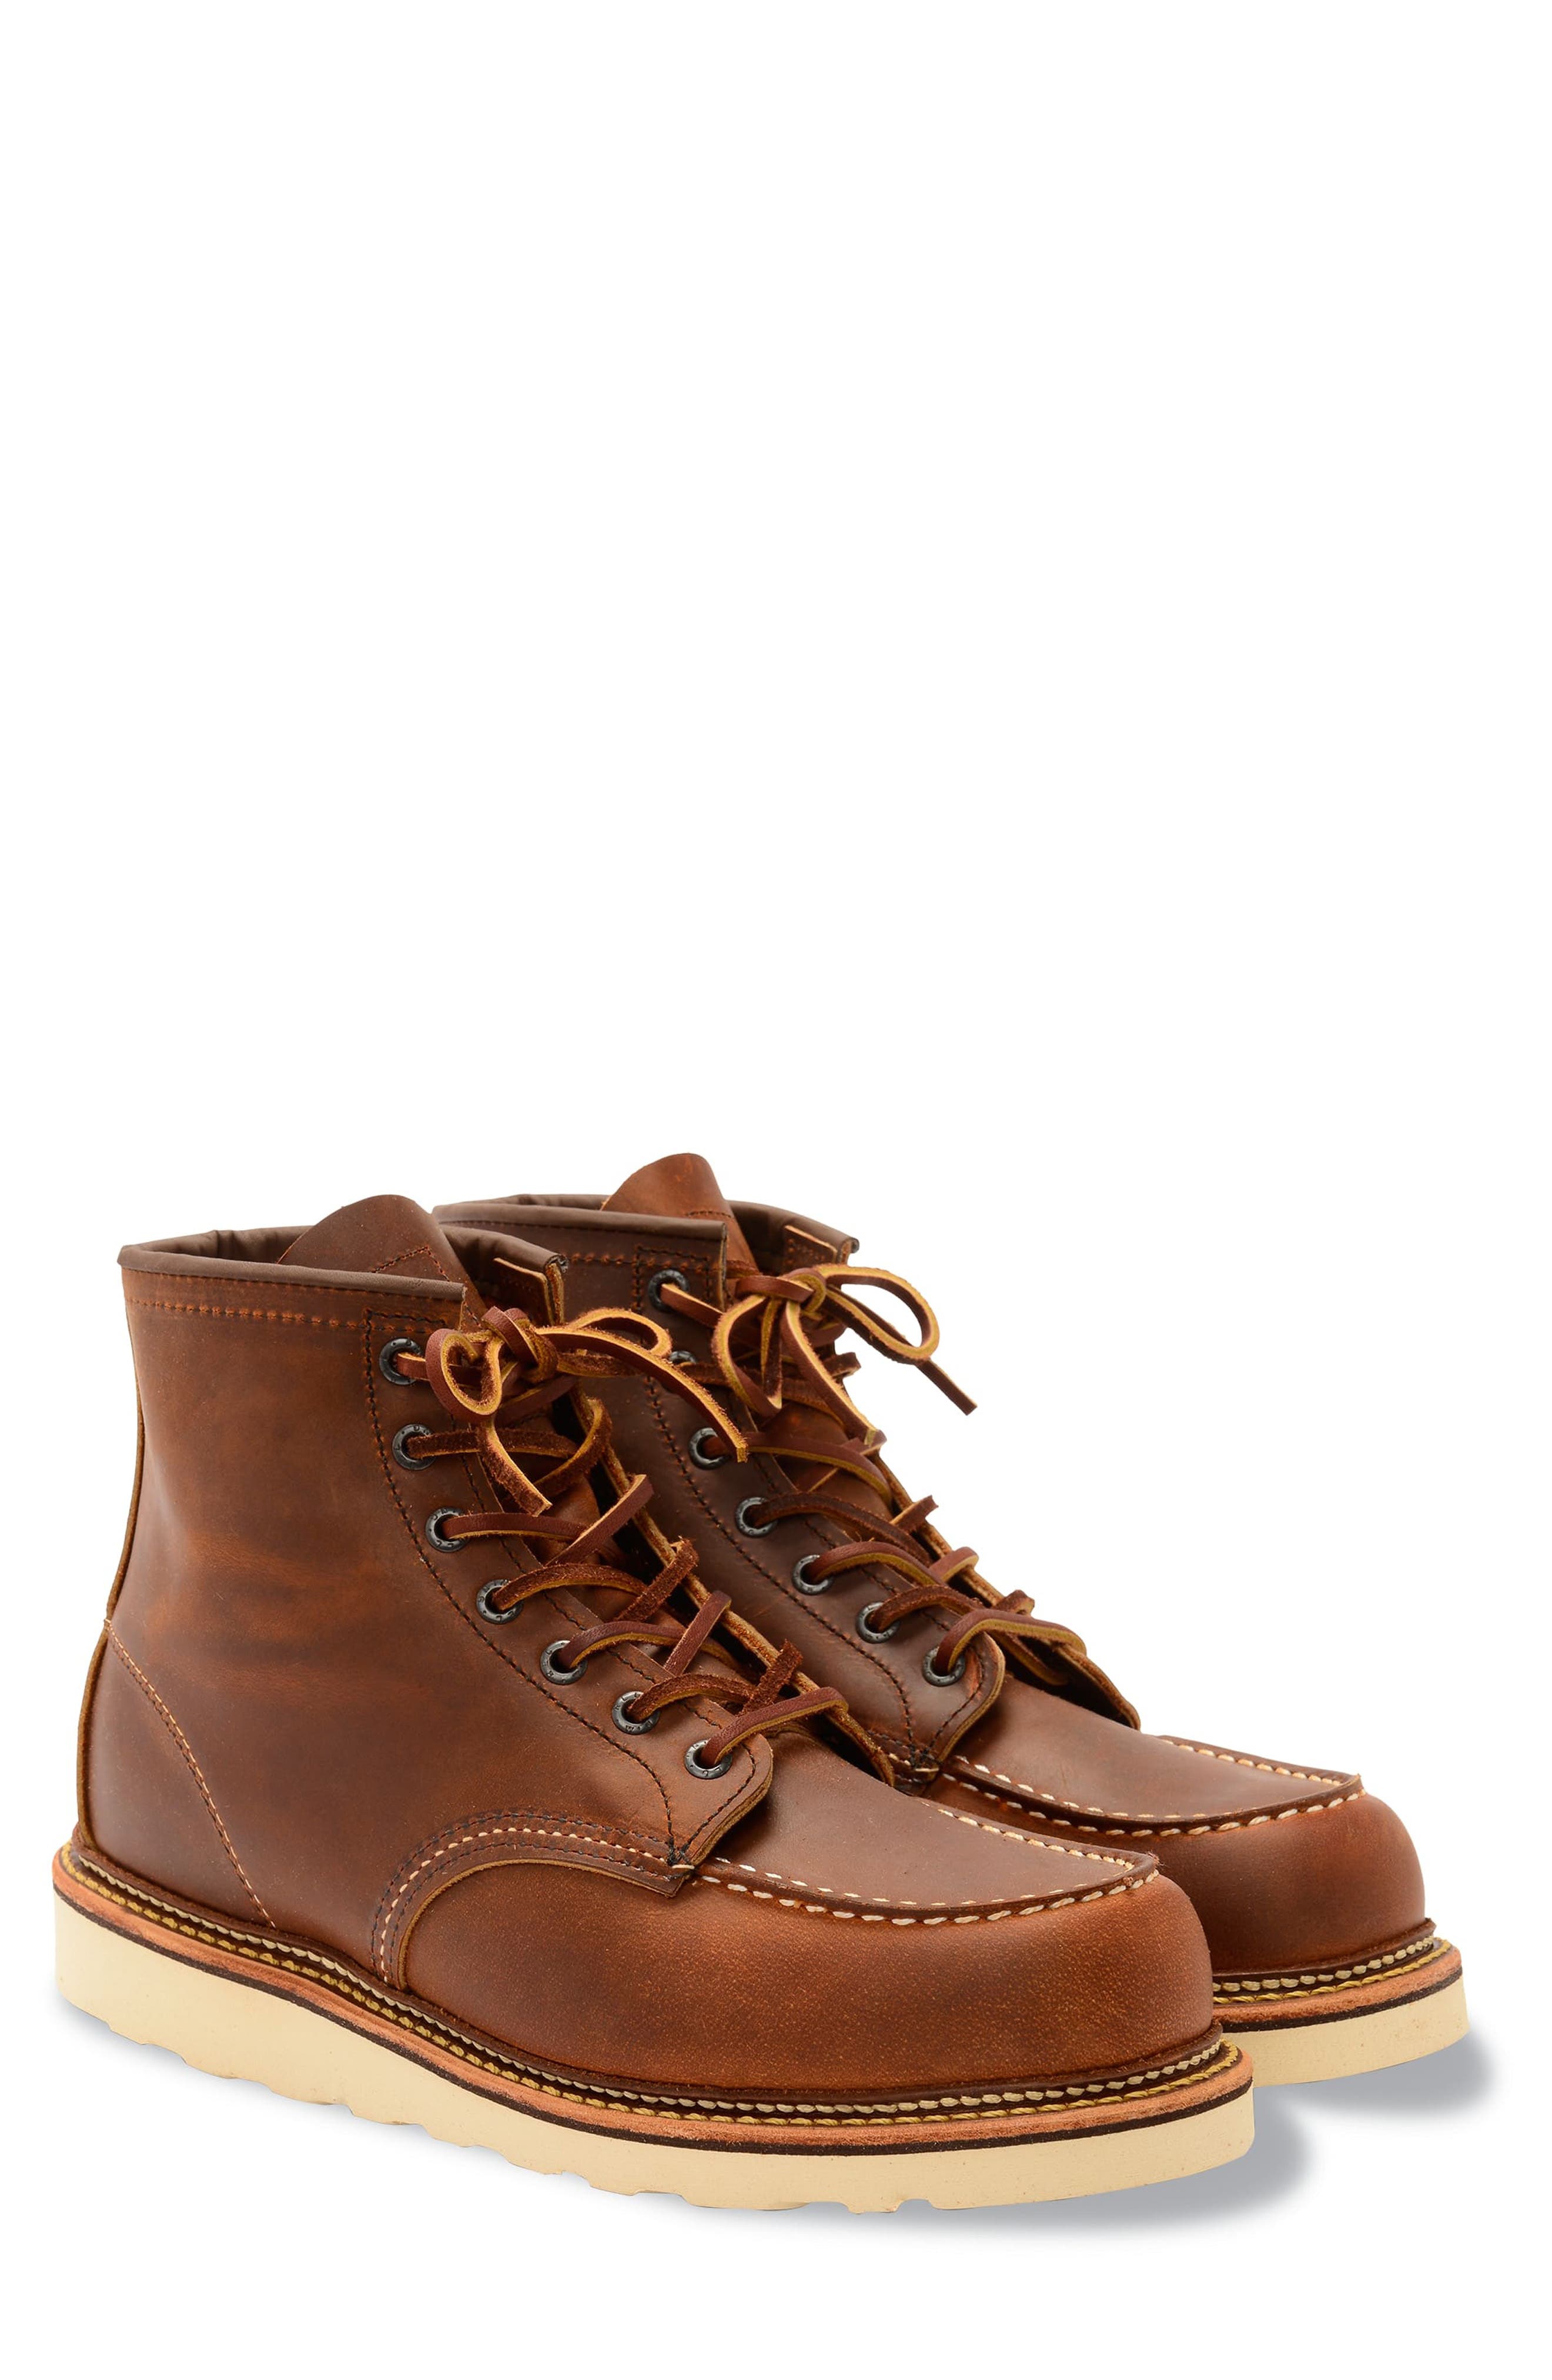 red wing boots black friday deals